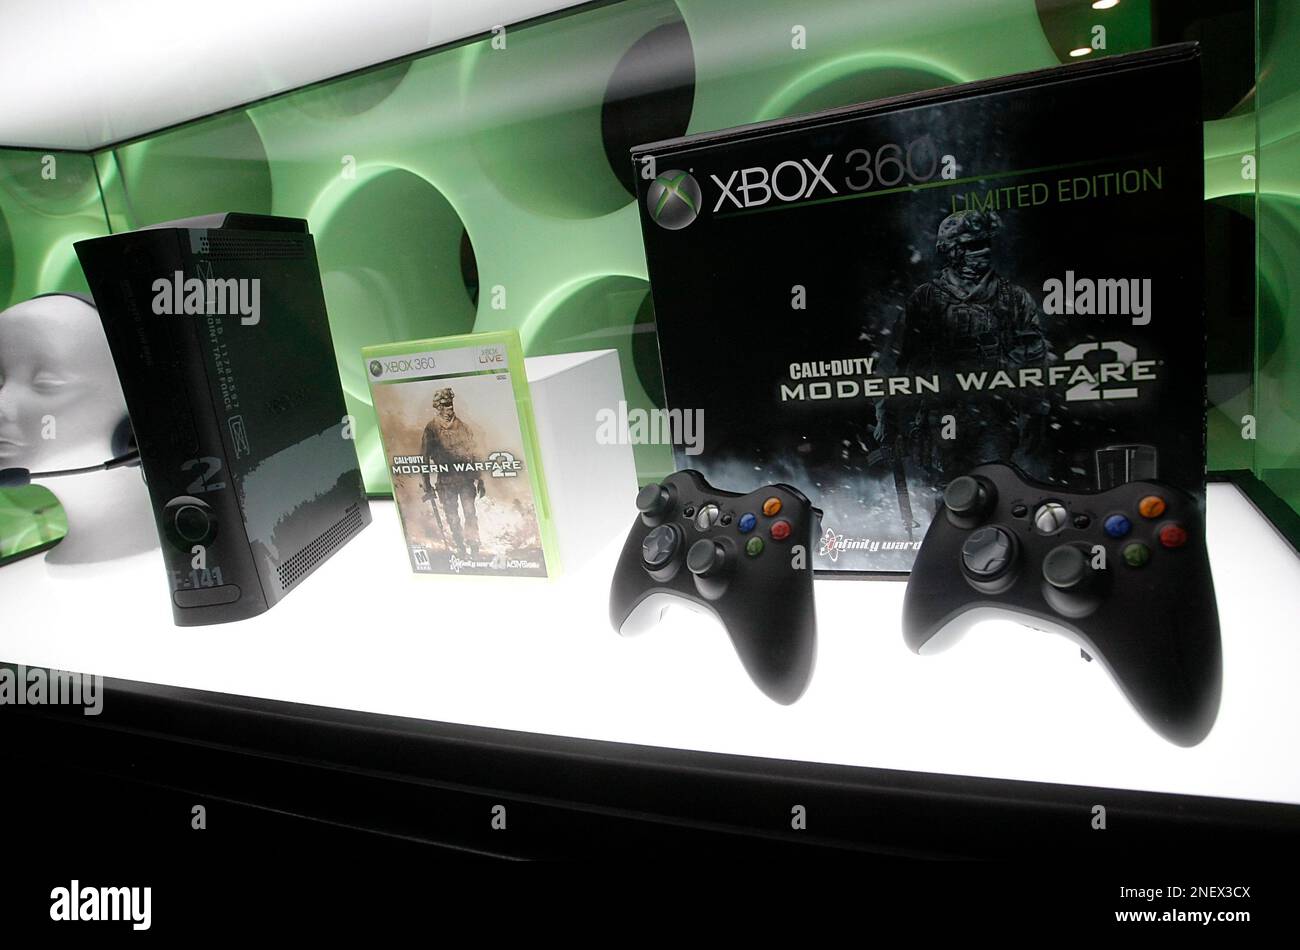 The Xbox 360 Modern Warfare 2 Limited Edition Console is unveiled in Los  Angeles on Tuesday, Sept. 15, 2009. The limited edition console is now  available for pre-order in the US and